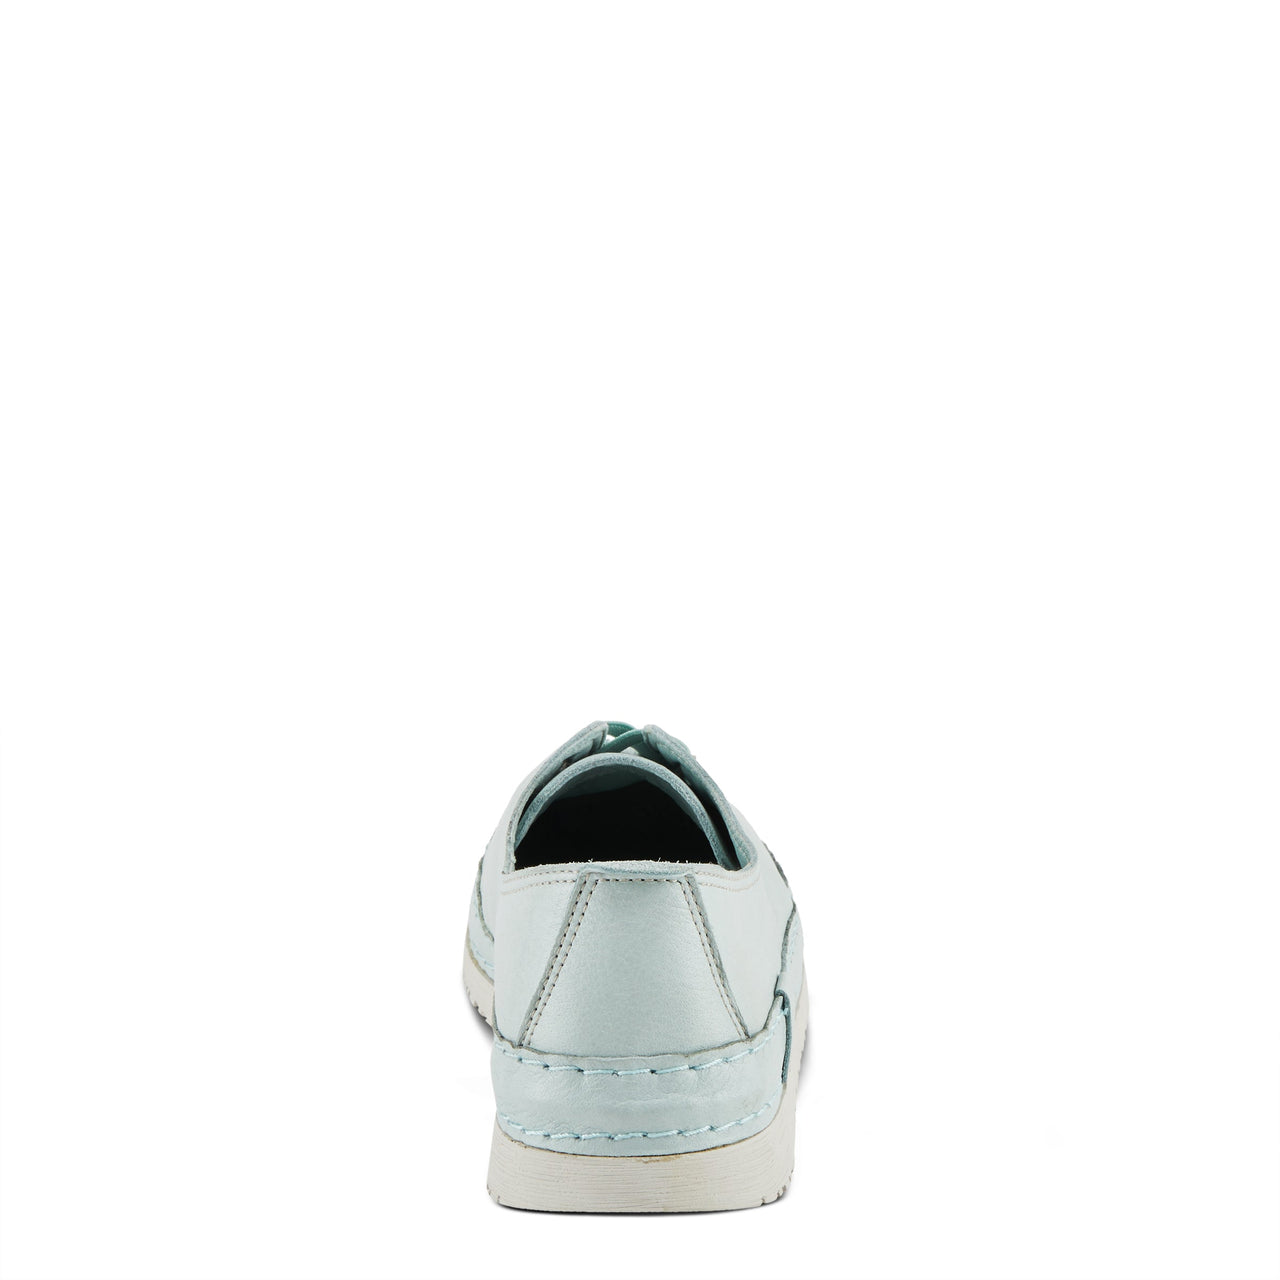 Stylish and comfortable Spring Step Abeck Sneakers with metallic details and cushioned footbed for all-day wear